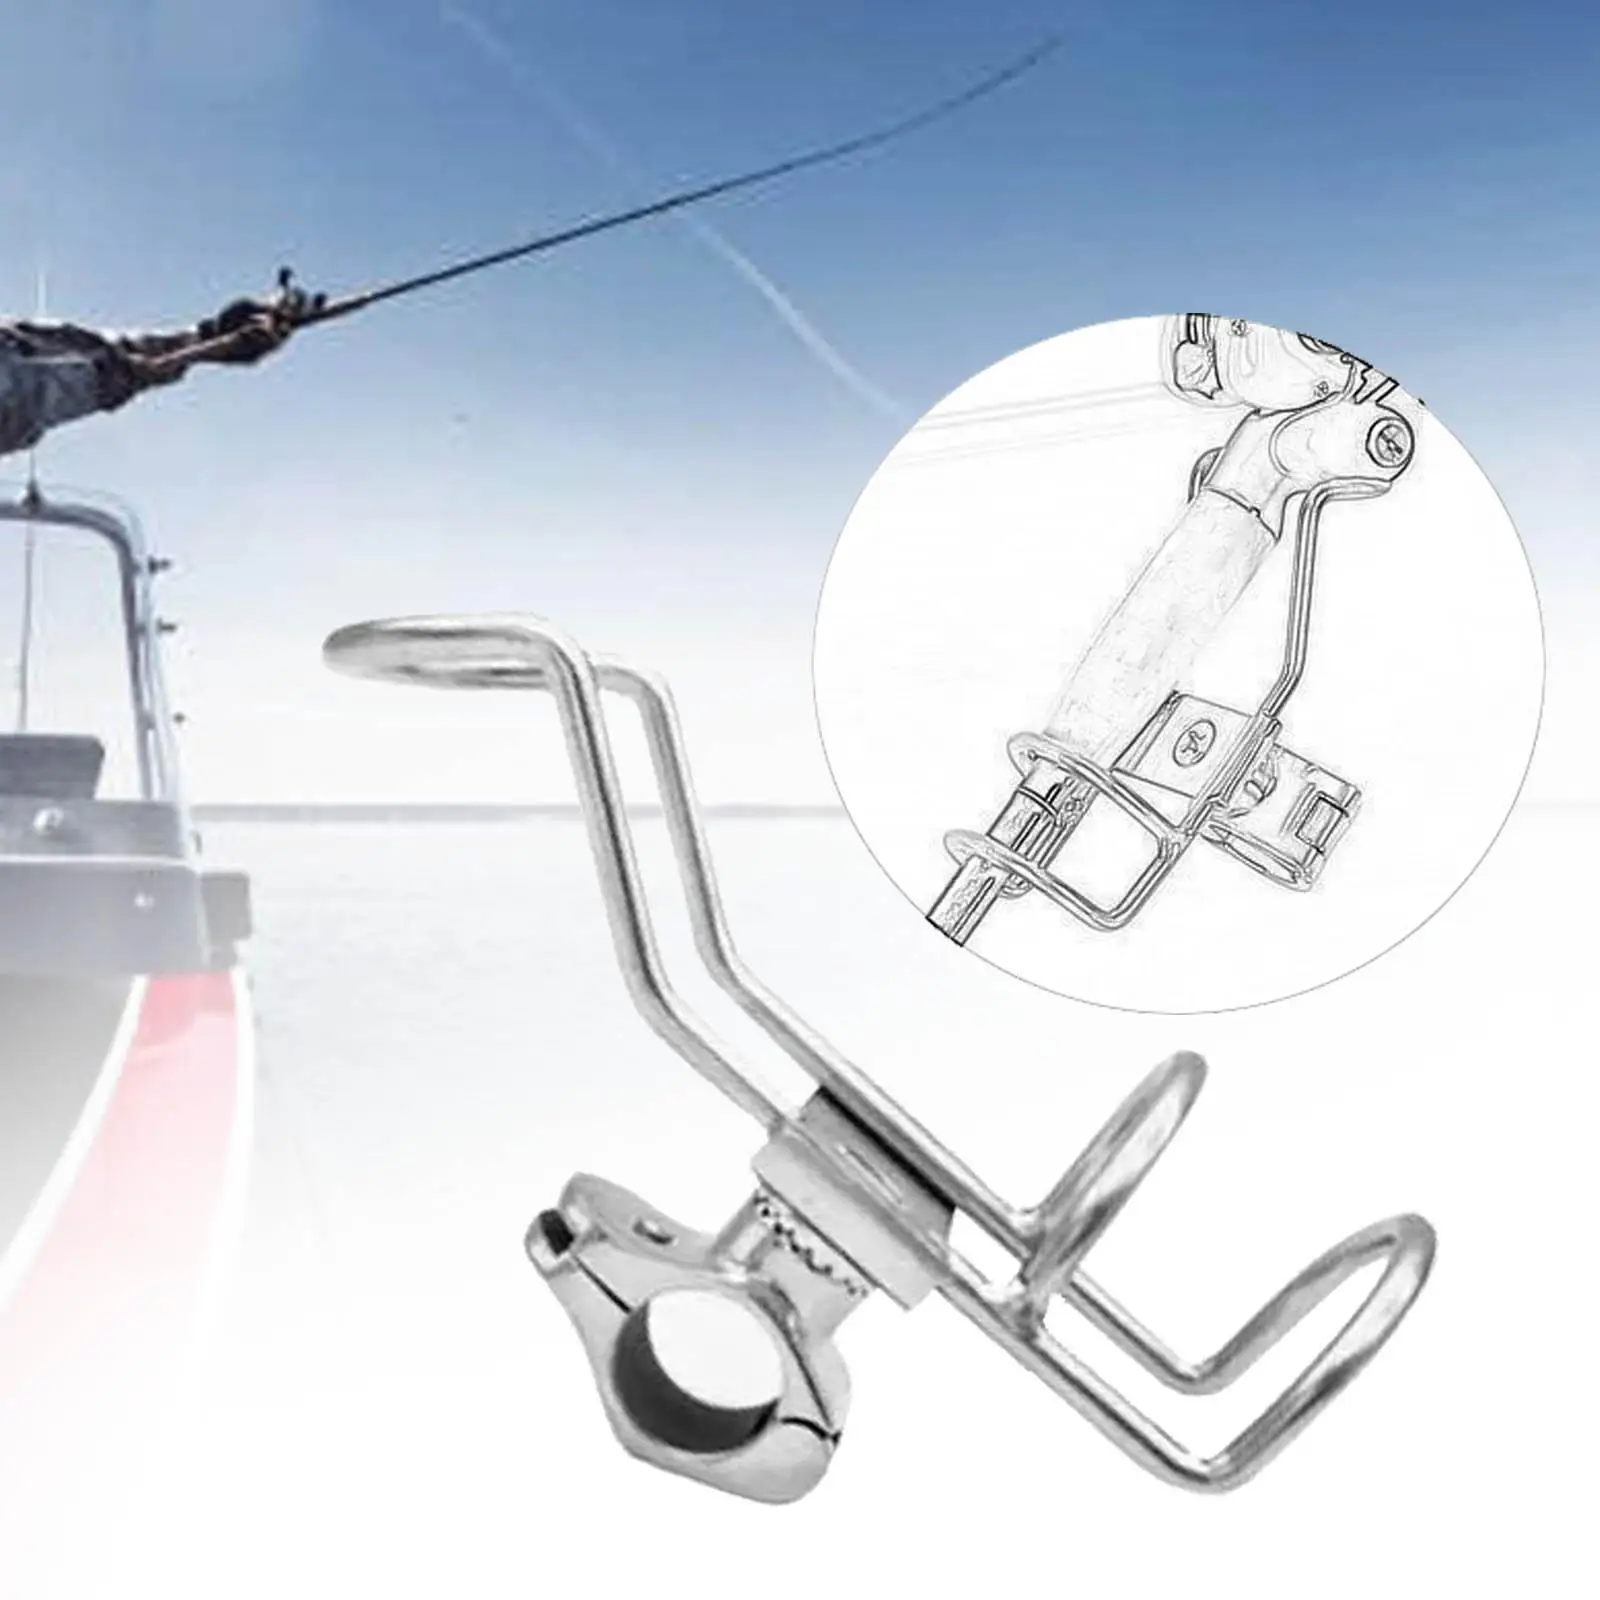 Fishing Rod Holders Easy Install Stainless Steel Support Fishing Pole Rack for